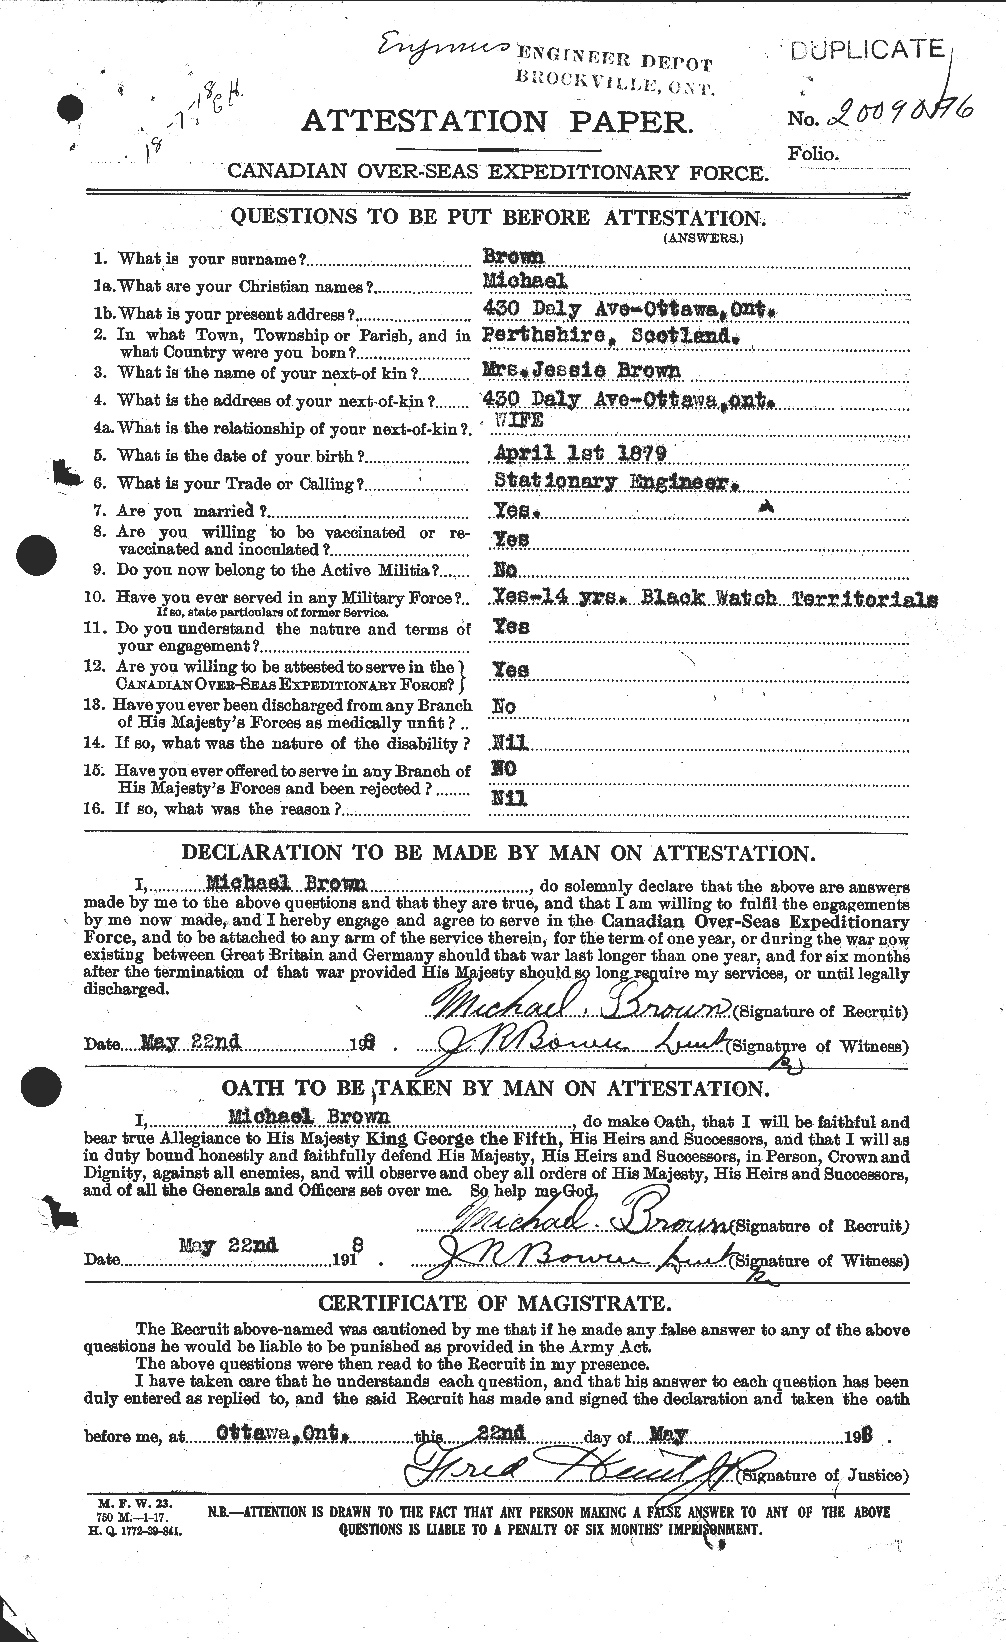 Personnel Records of the First World War - CEF 267065a